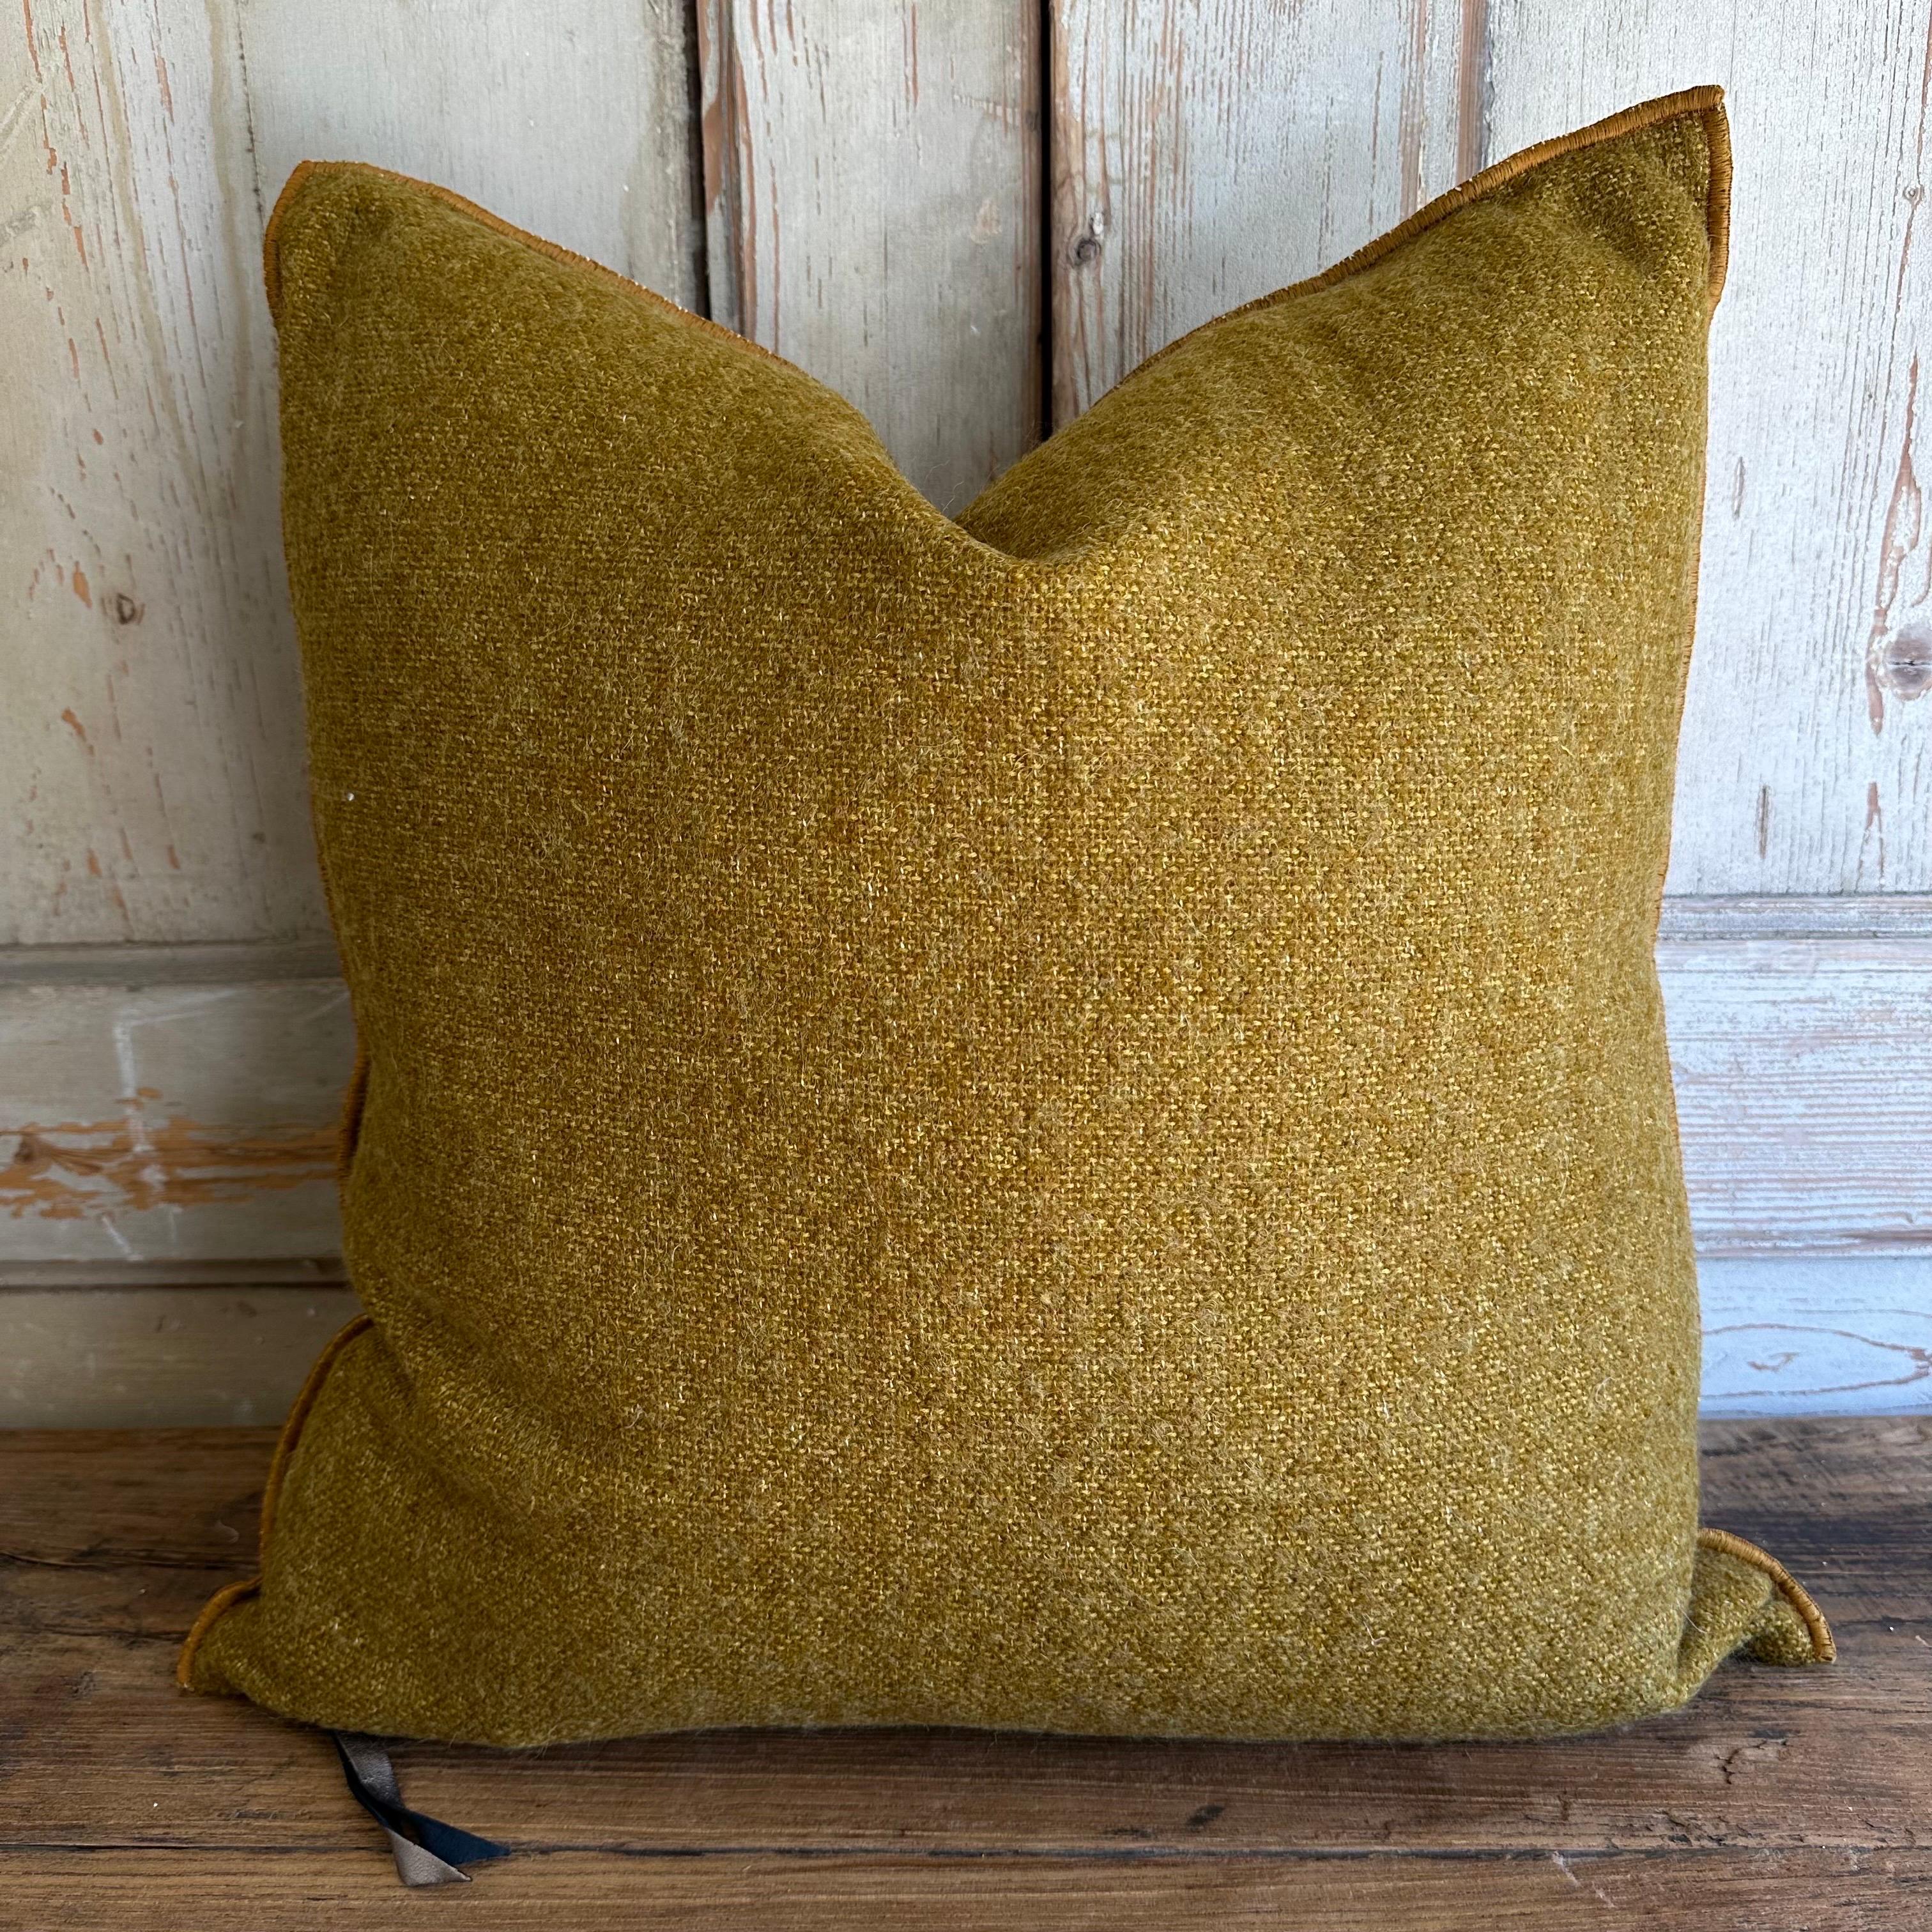 Custom wool blend accent pillow with down insert 
Color: Ocre which is a dijon french mustard colored nubby boucle style pillow with a stitched edge, metal zipper closure. 
Size: 22” x 22”
Our pillows are constructed with vintage one of a kind